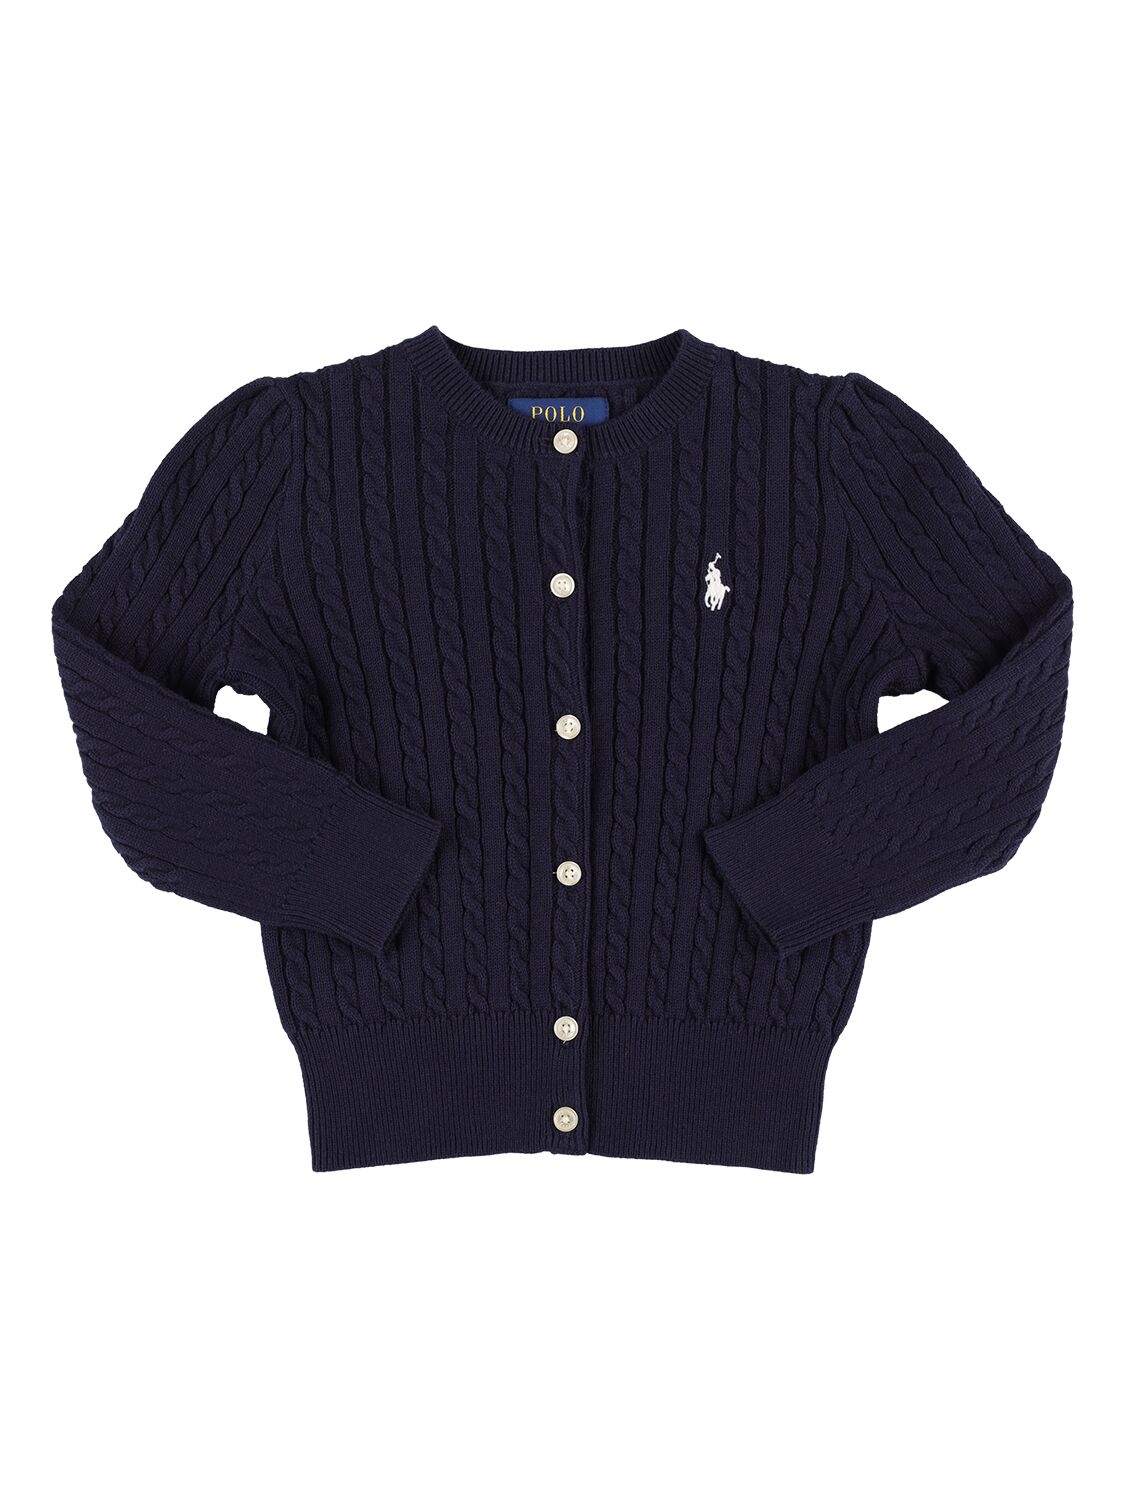 Image of Cotton Cable Knit Cardigan W/ Logo